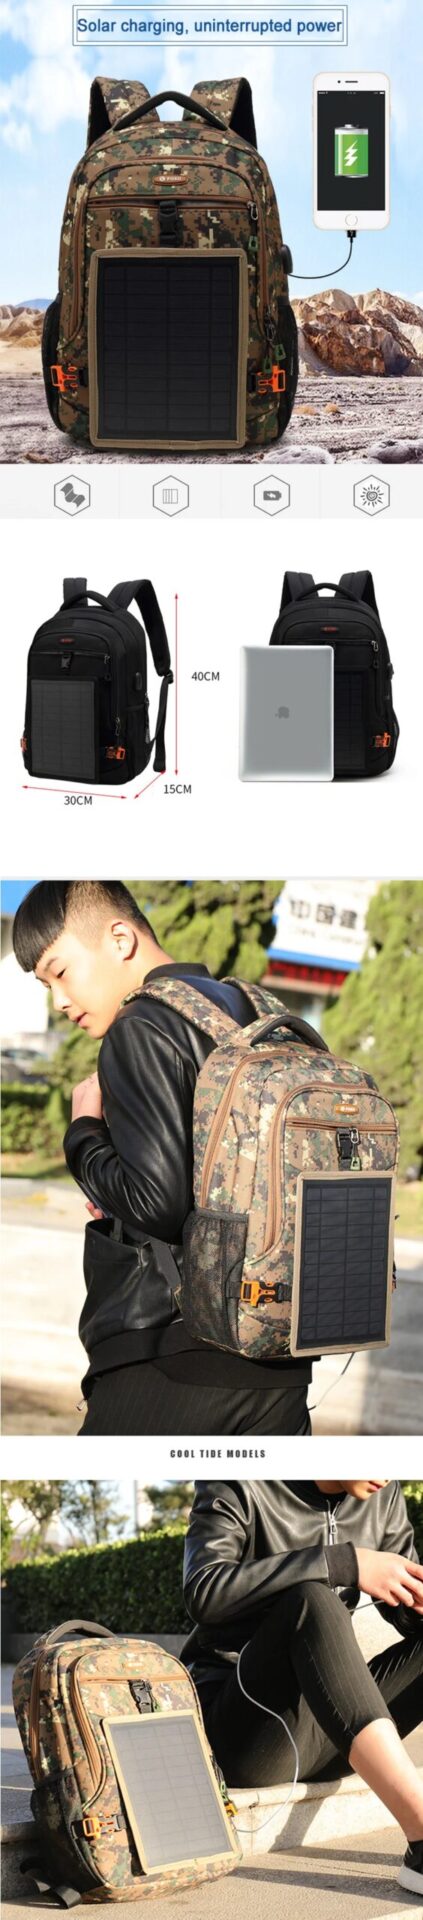 Solar Charging Camouflage Backpack